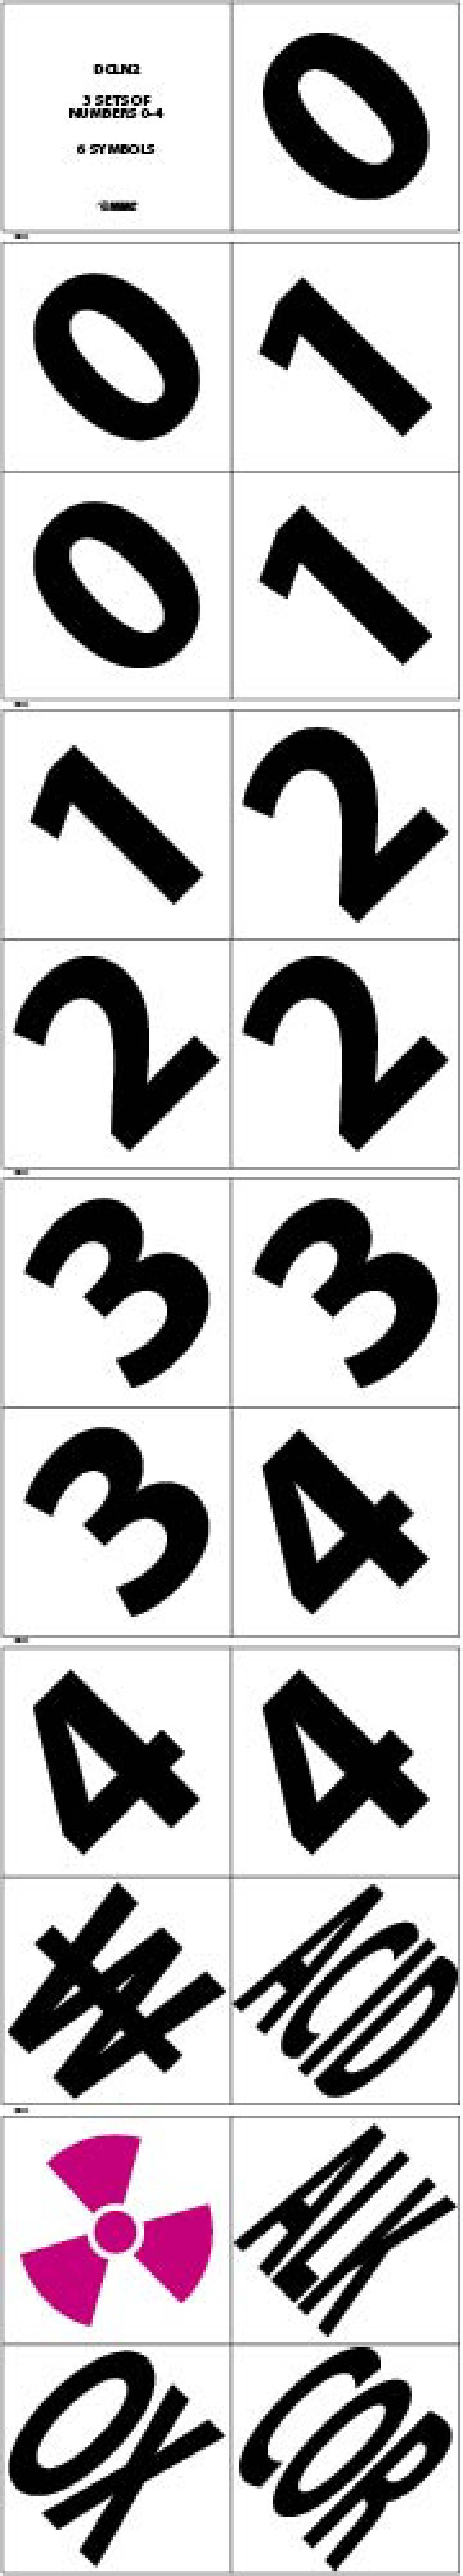 2" Numbers And Symbols Kit-eSafety Supplies, Inc